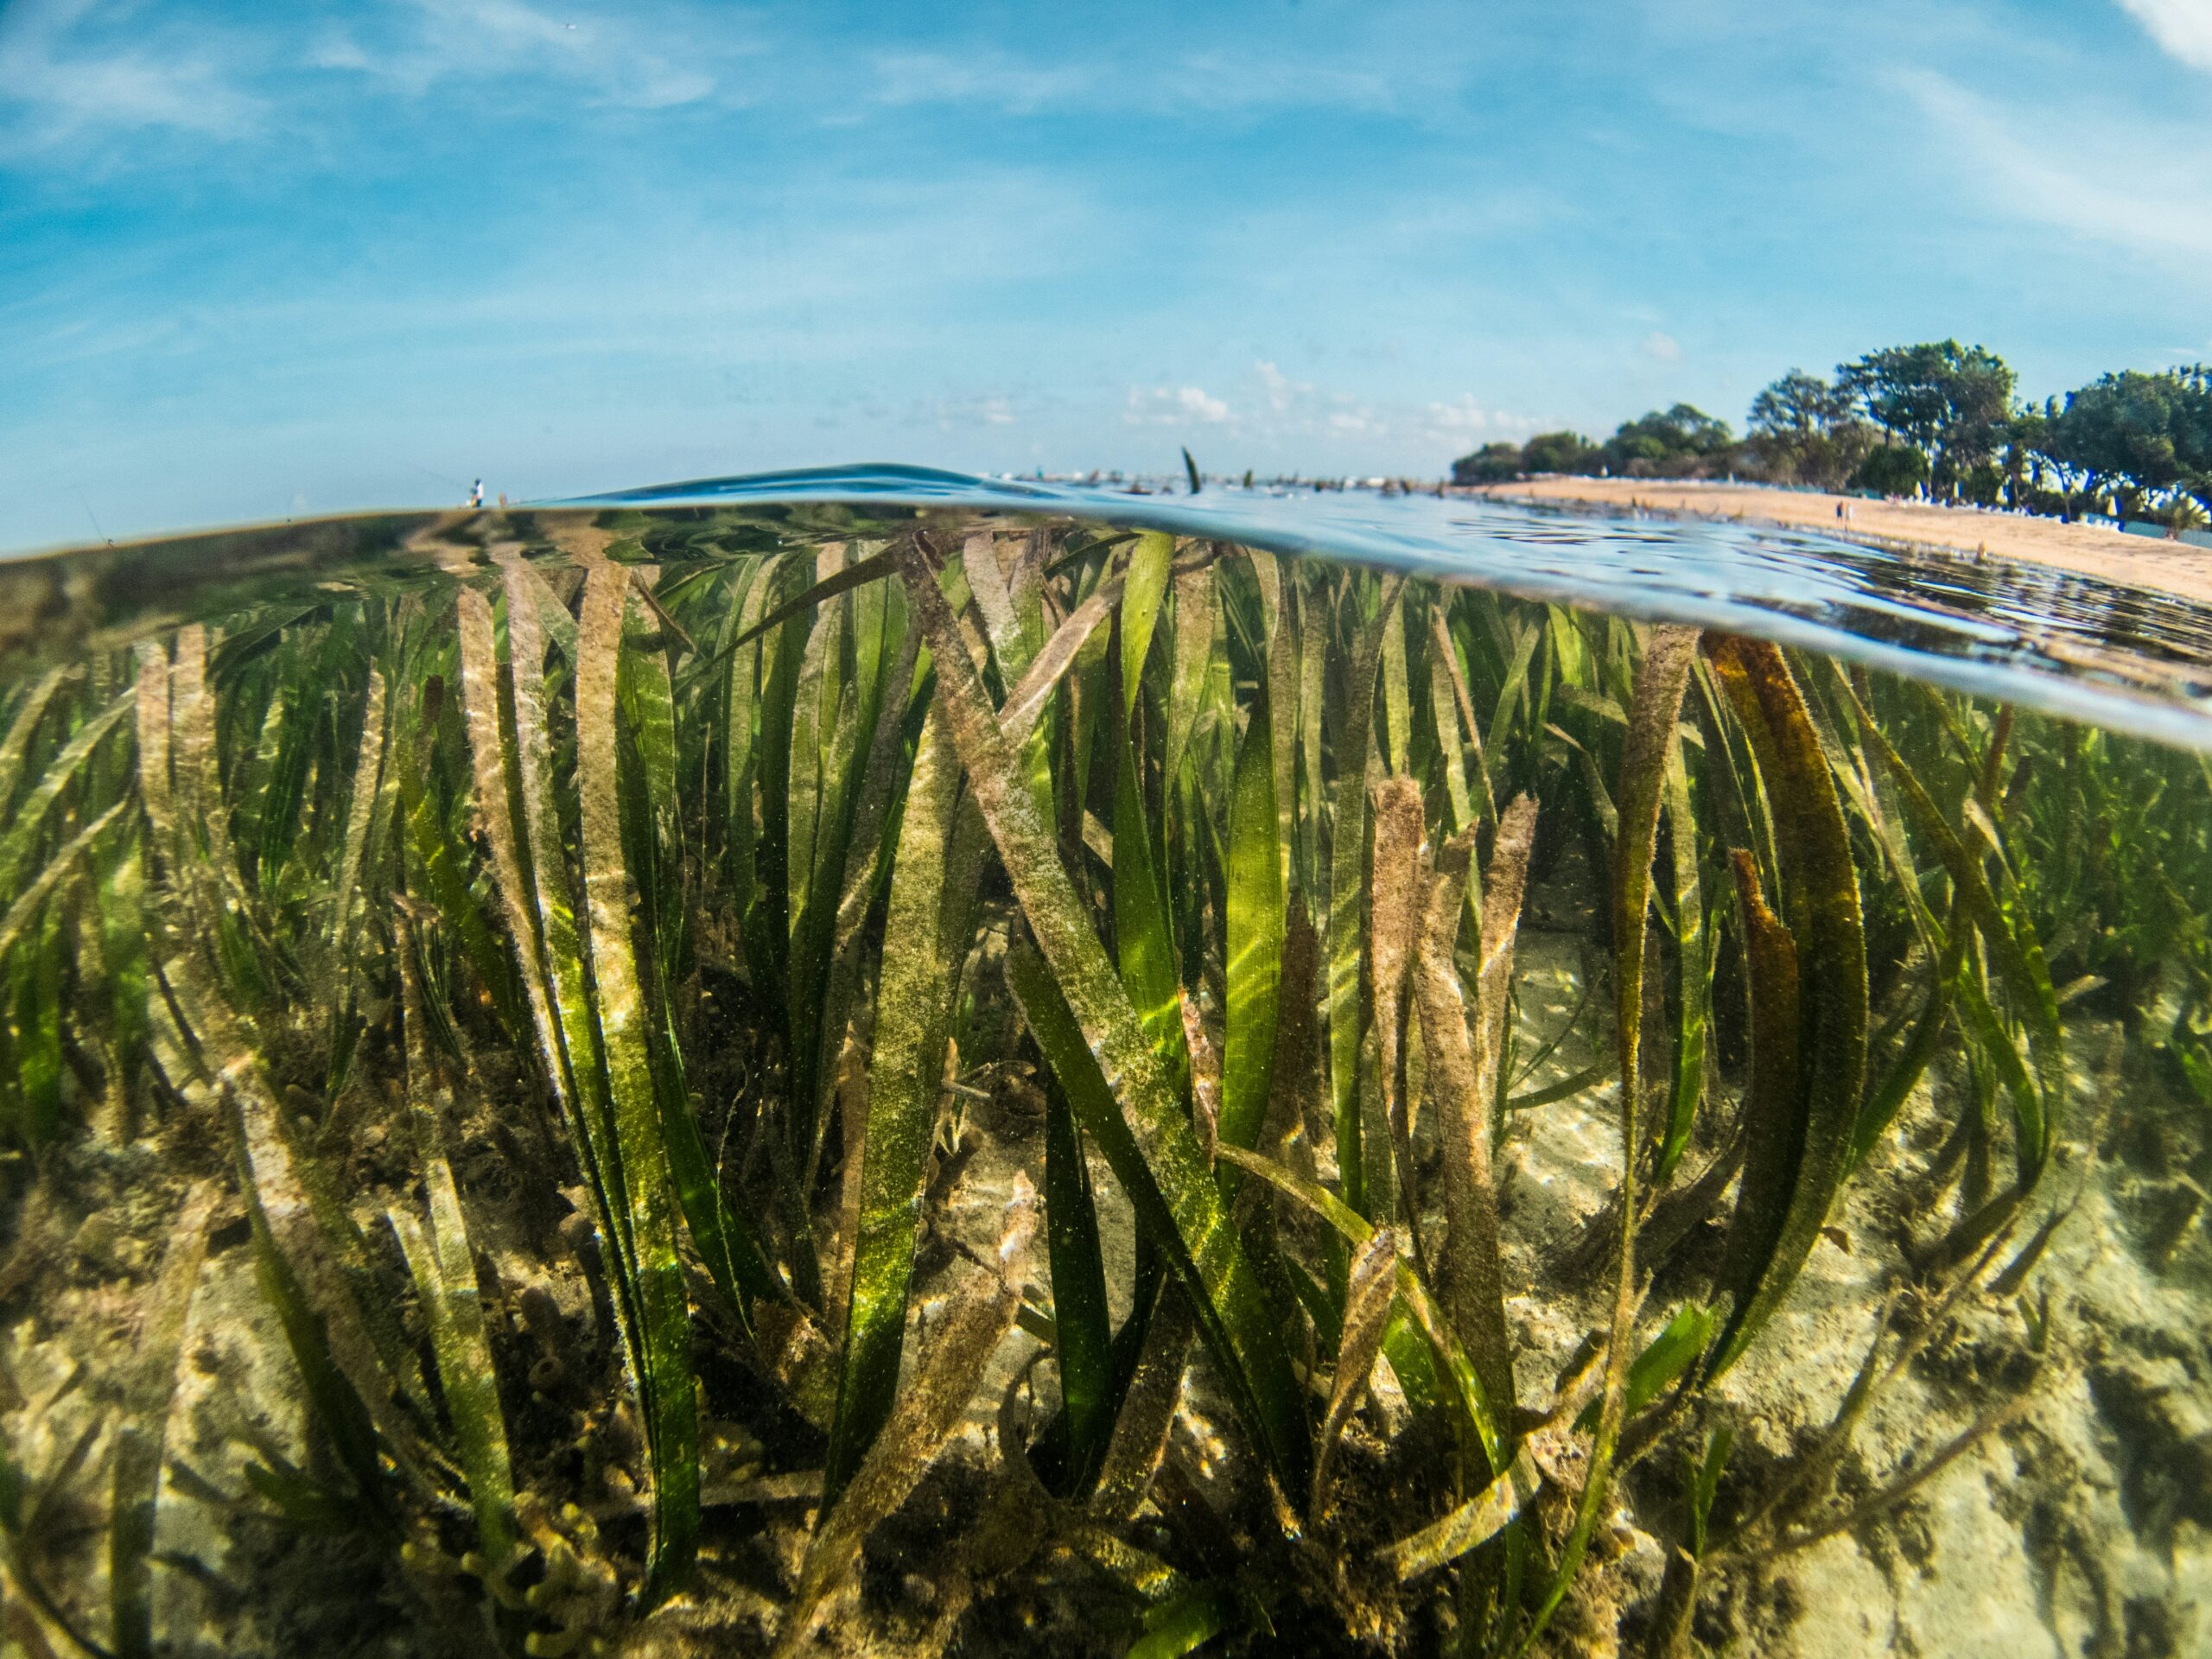 Photo taken with a camera lens half under water and half above water showing a thick seagrass forest.